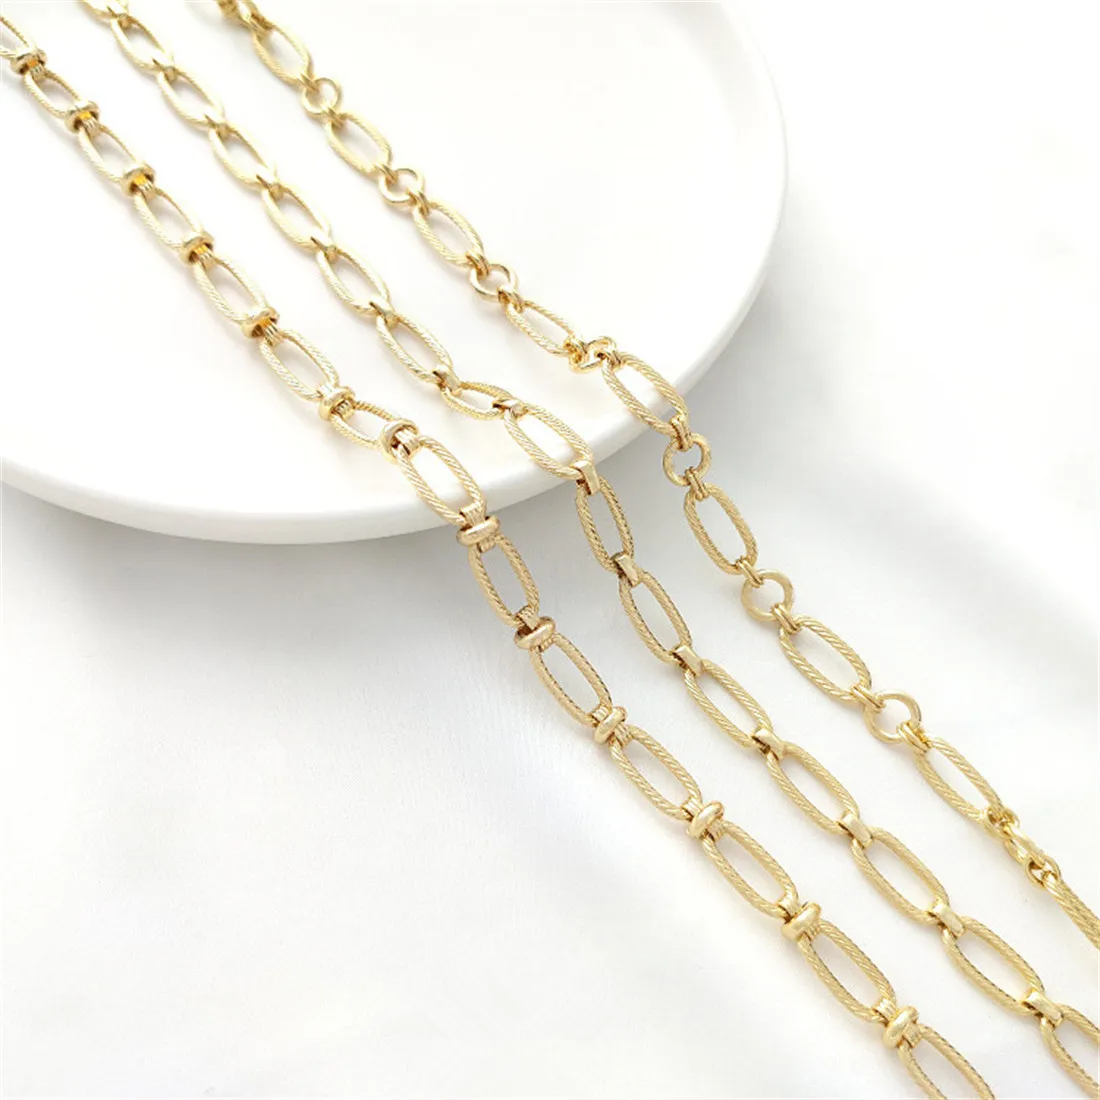 14K Gold Wrapped Oval Fried Dough Twists Chain Manual Long O-ring Chain Diy Bracelet Necklace Jewelry Hand Made Loose Chain B671 1000pcs 10mm 20mm gray adhesive scratch off sticker diy manual hand made scratch card